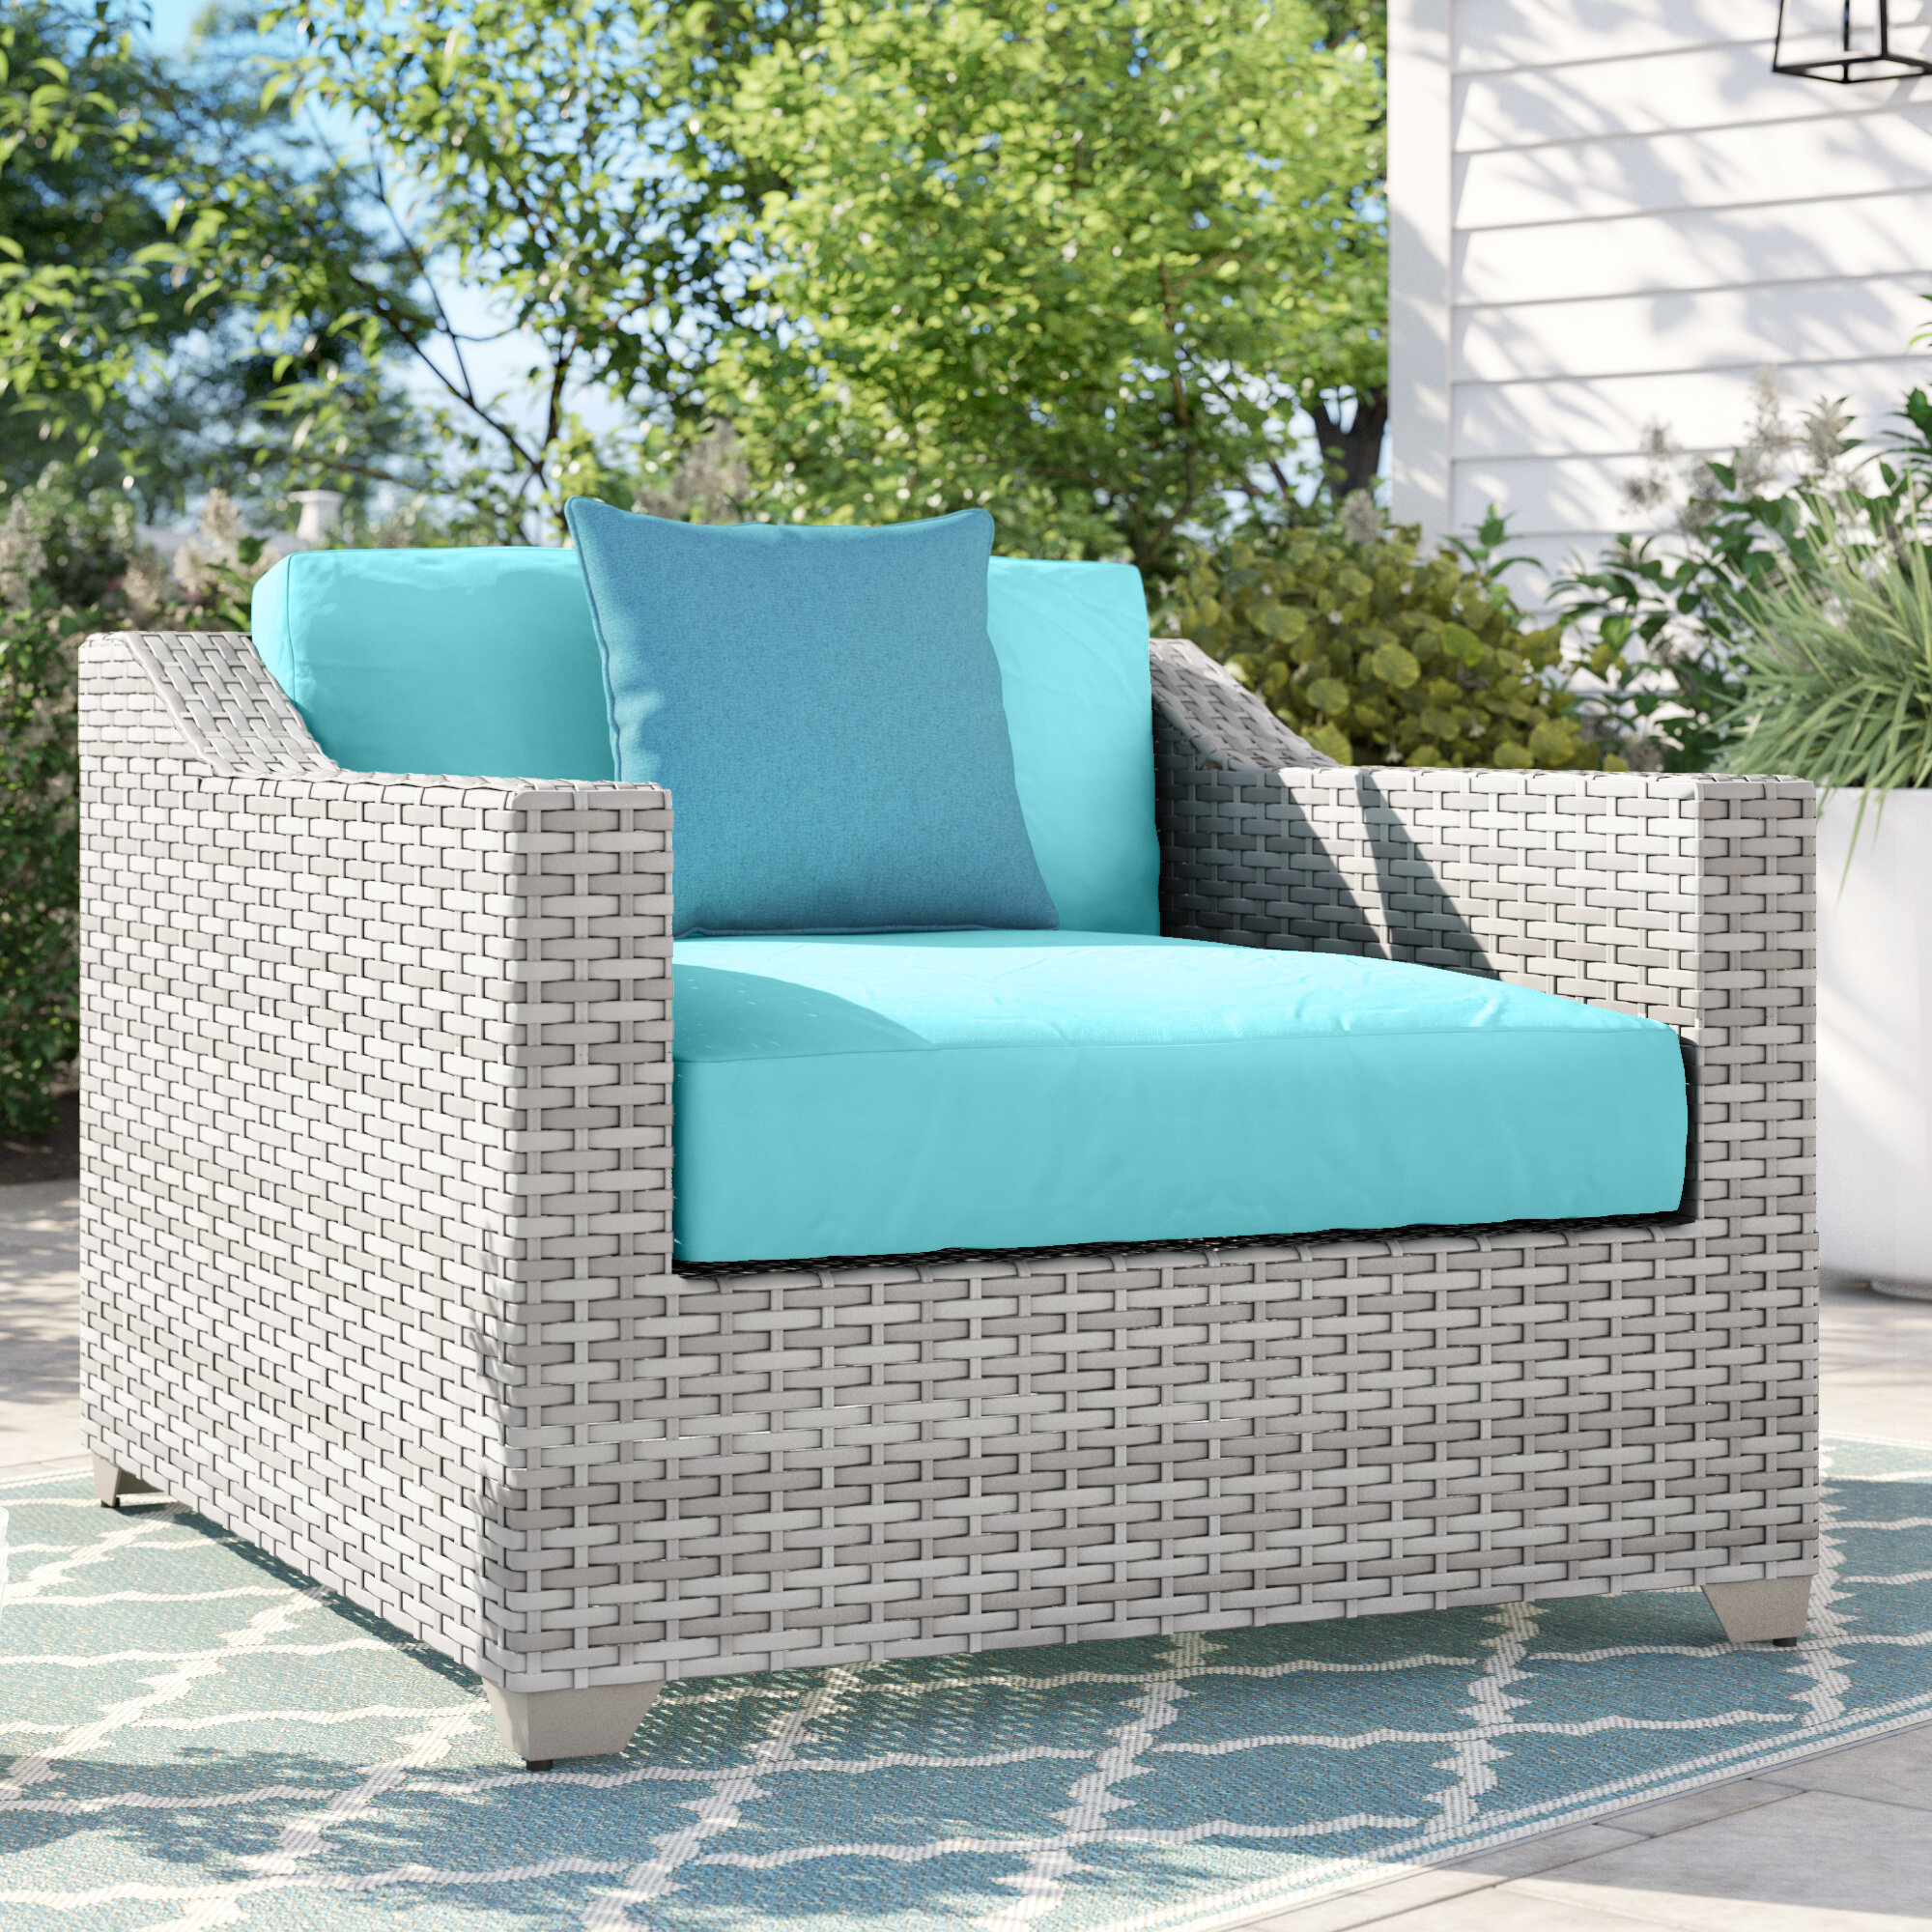 Sol 72 Outdoor Falmouth Patio Chair With Cushions Reviews Wayfair